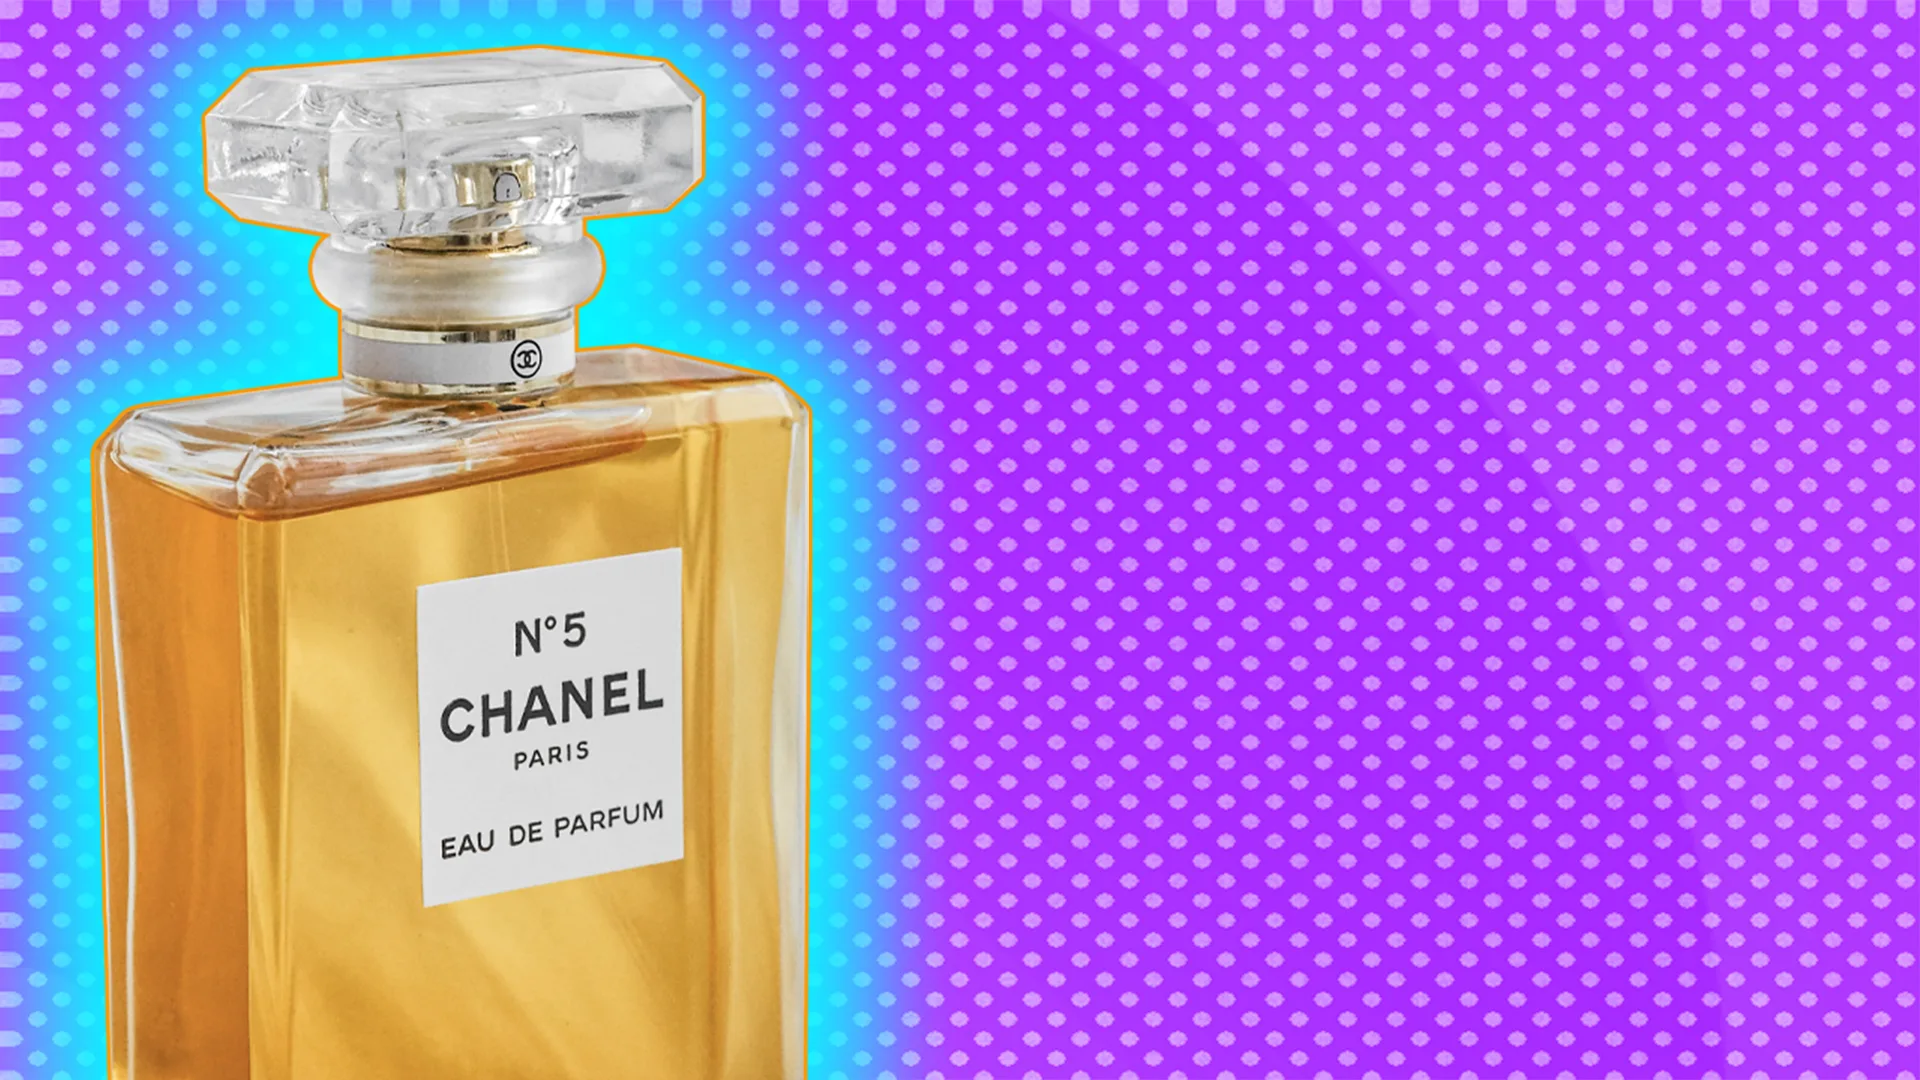 A bottle of Chanel perfume with a blue glow on a purple background.